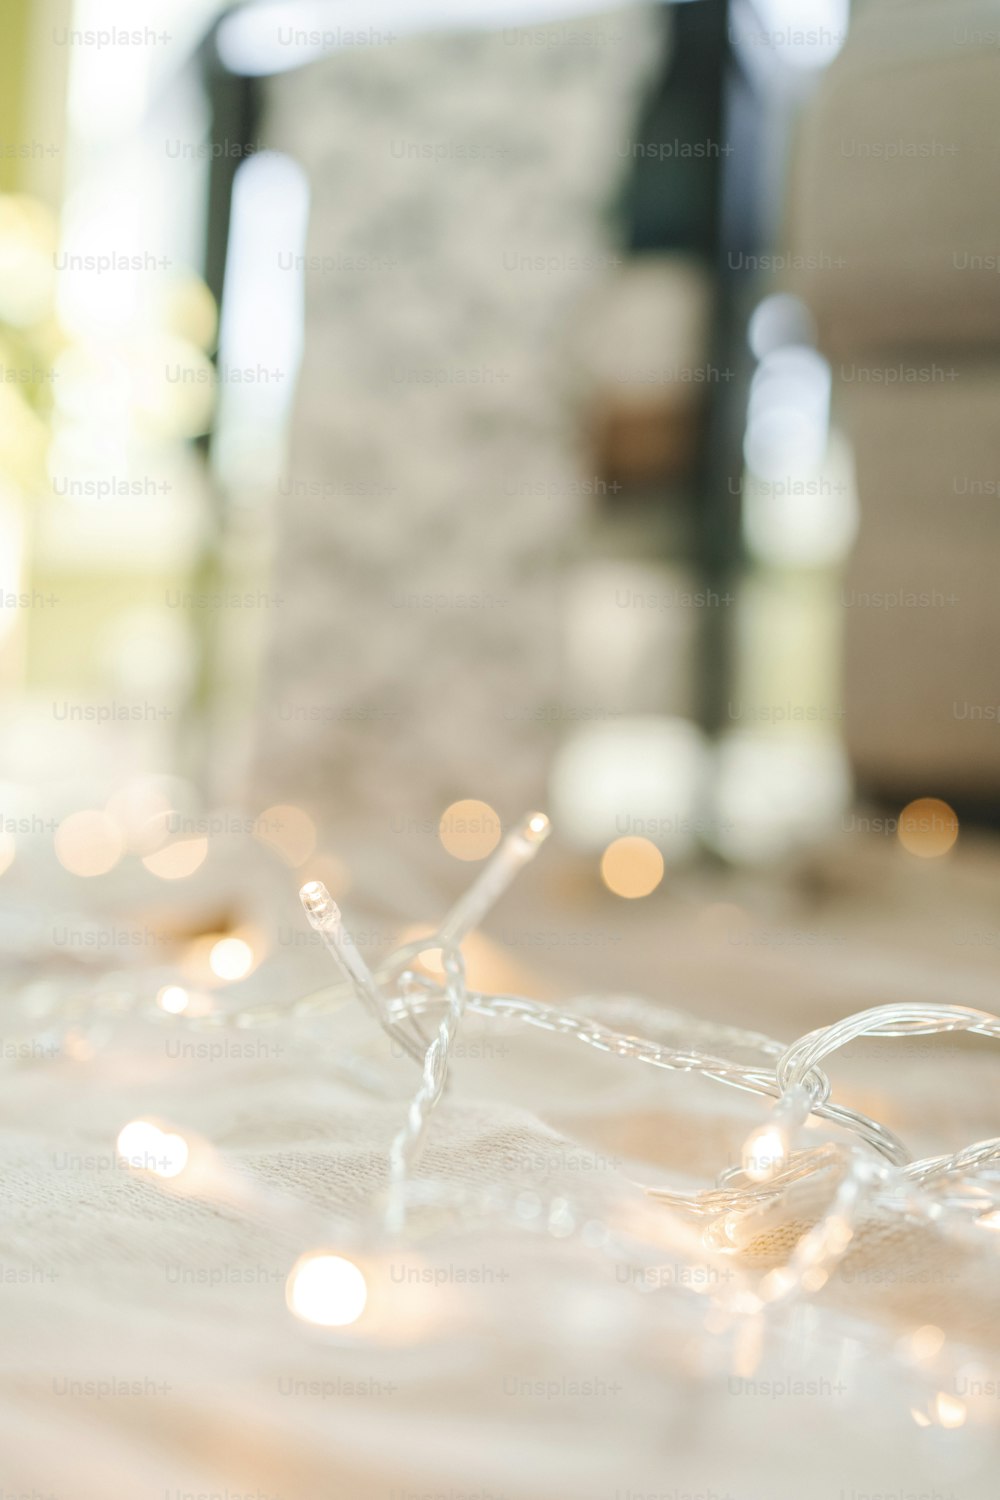 a close up of a string of lights on a table